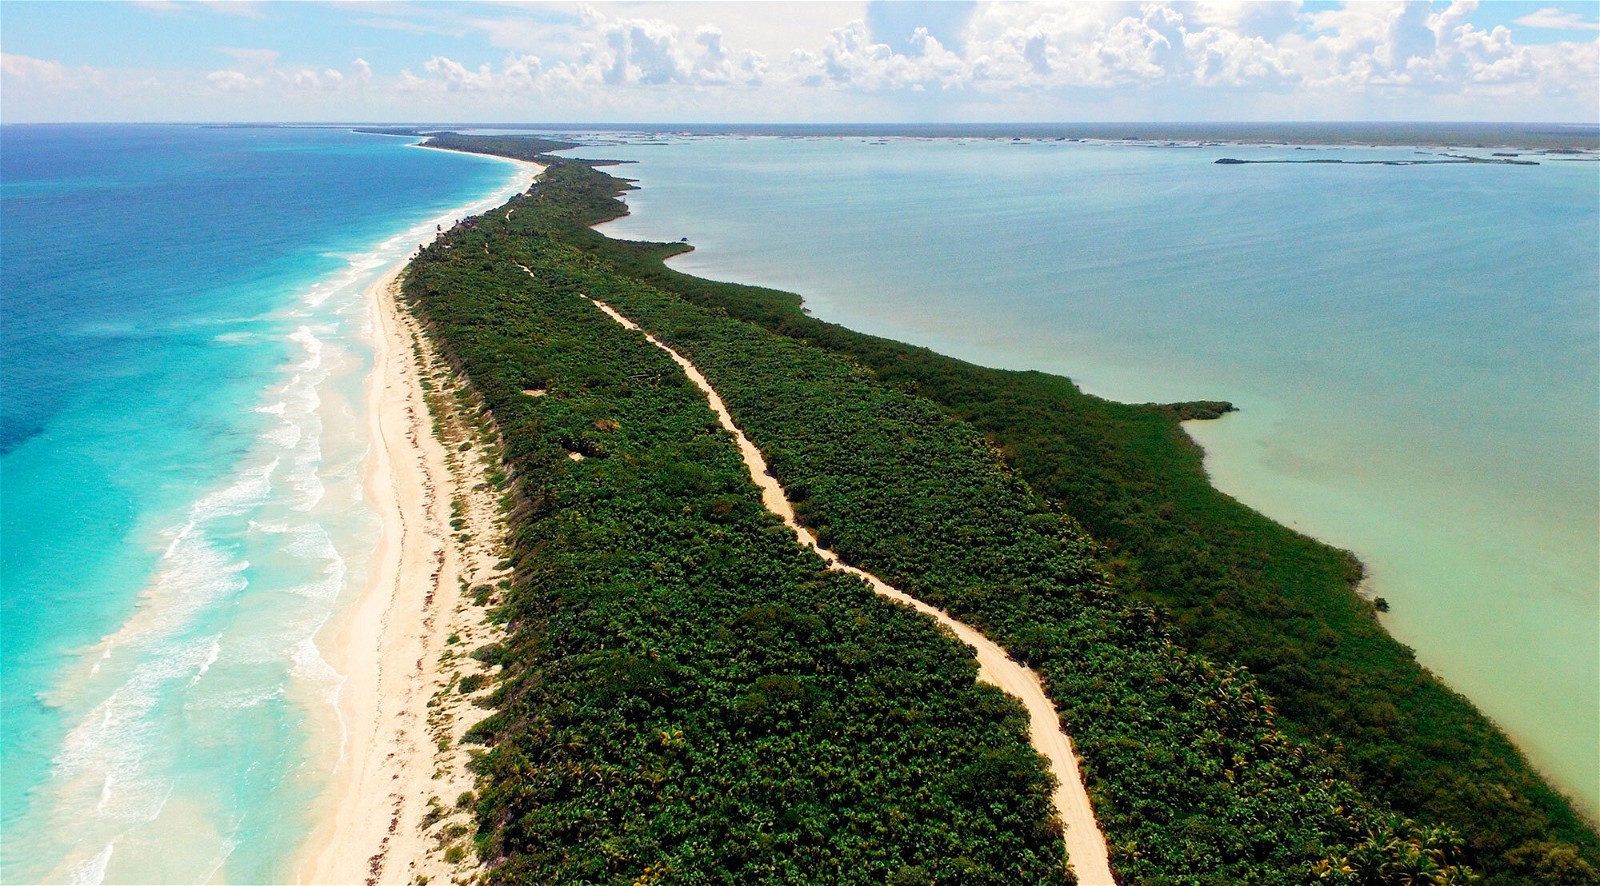 Sian Ka'an Biosphere Reserve: A UNESCO World Heritage Site, Sian Ka'an is a sprawling natural reserve comprising diverse ecosystems, including wetlands, mangroves, lagoons, and tropical forests